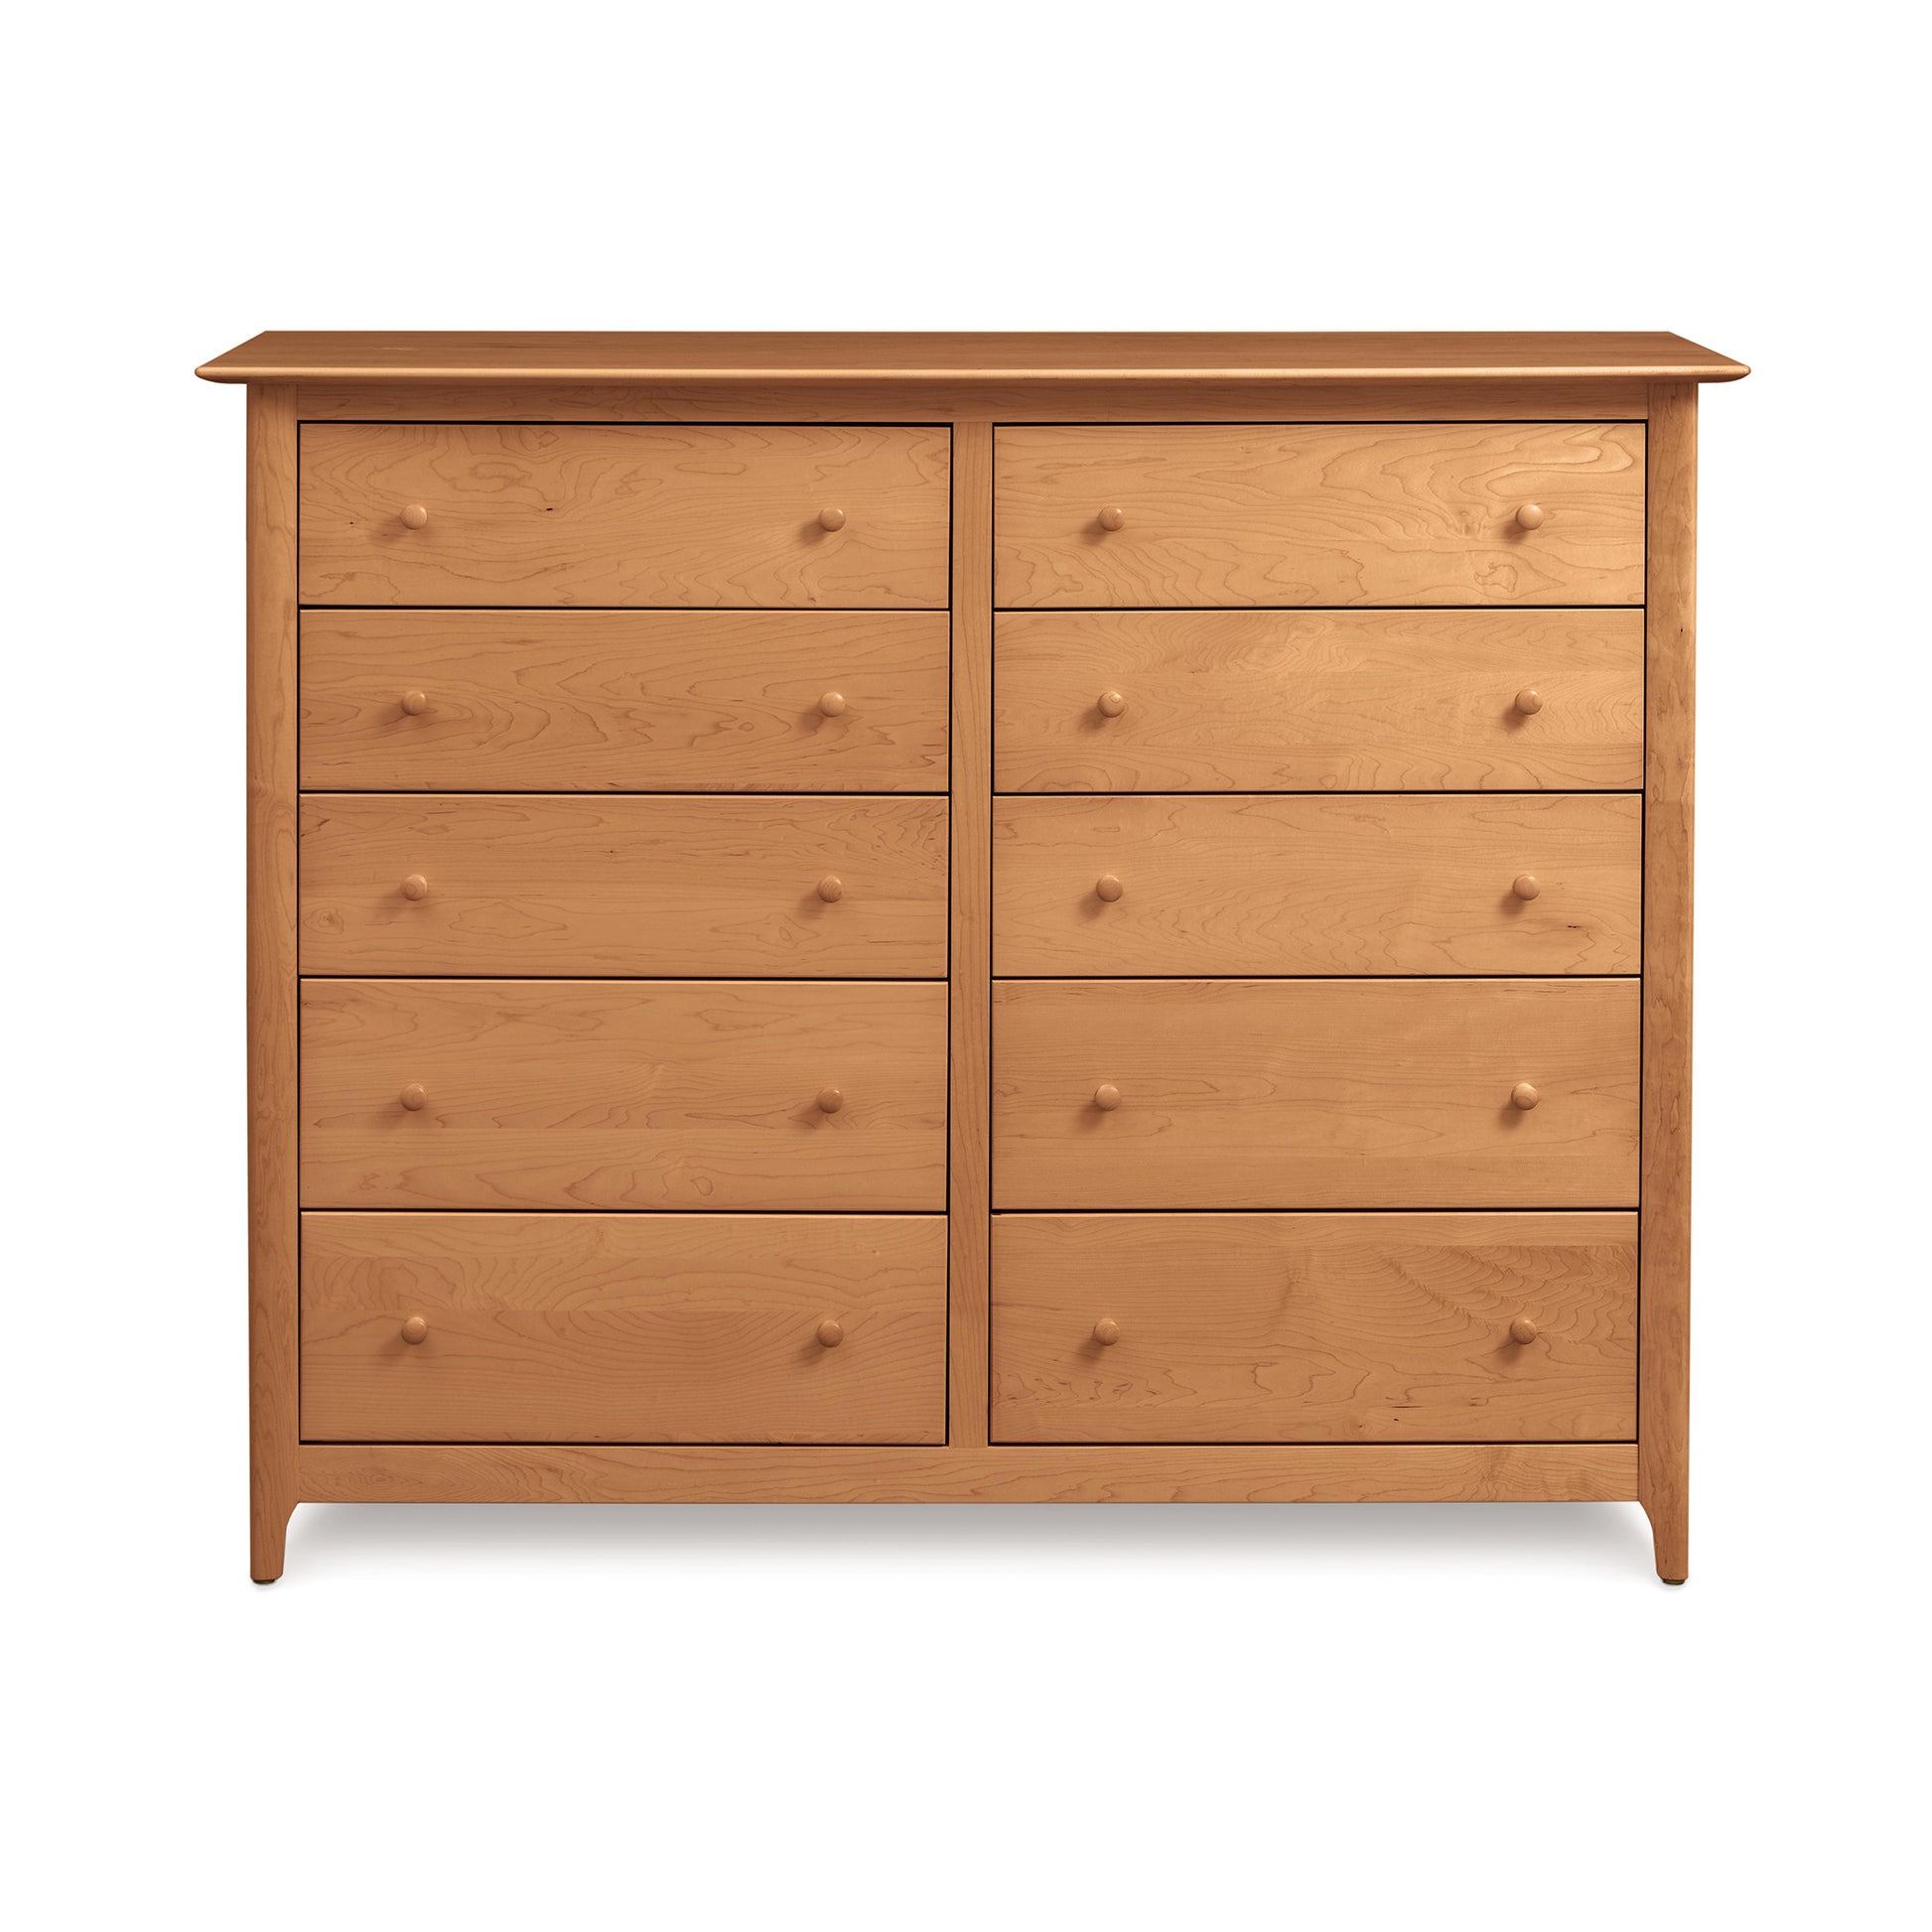 A Copeland Furniture Sarah 10-Drawer Dresser with multiple drawers divided into two columns, standing against a plain white background.